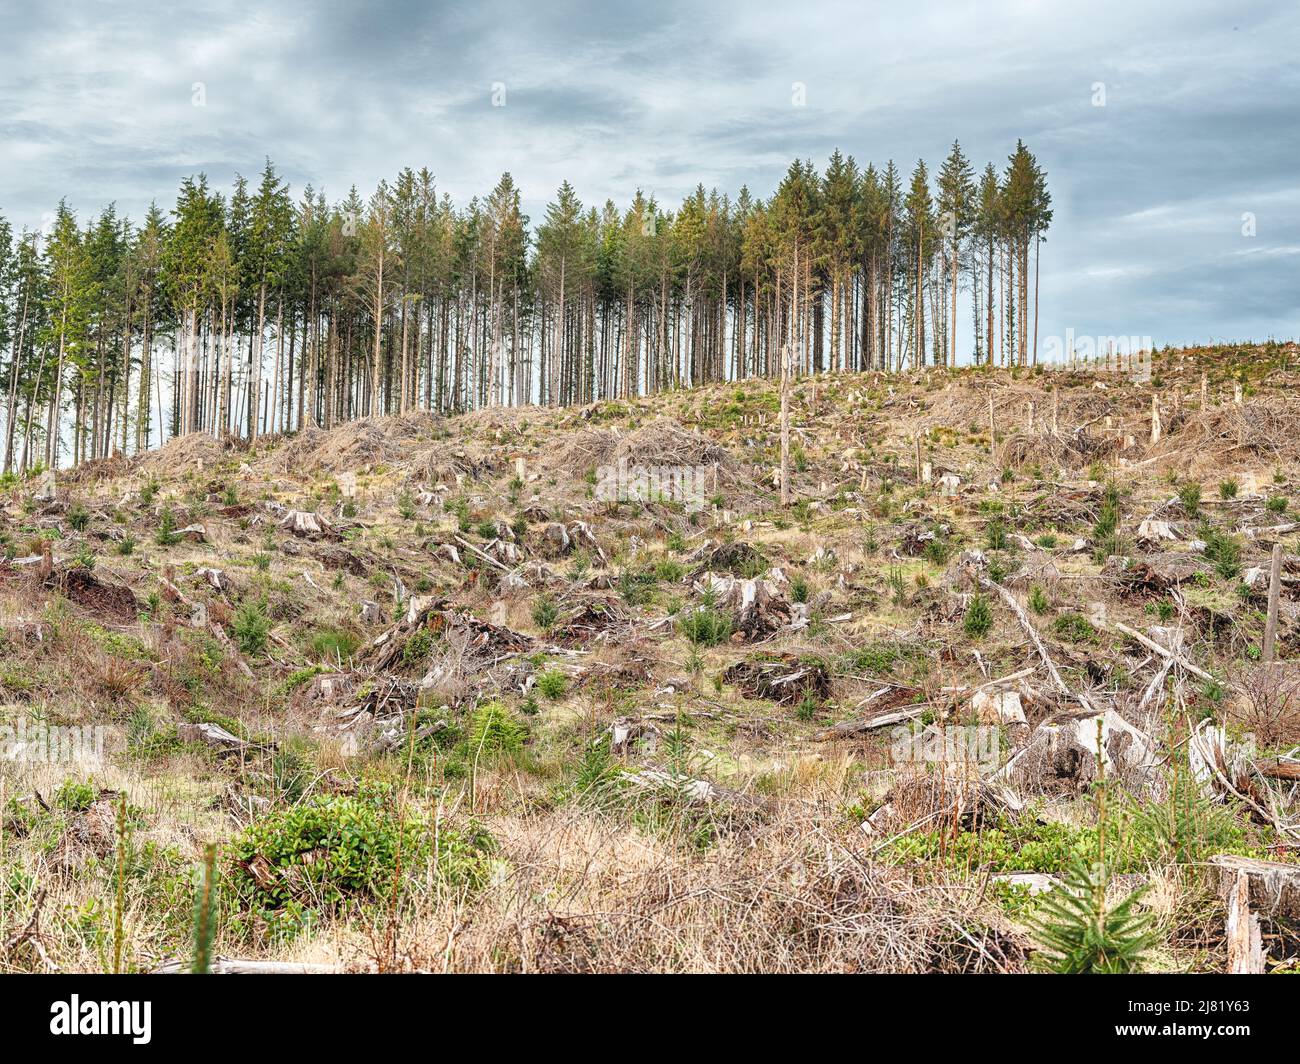 A small section of trees stands behind the slash remaining from a forest that has been clear-cut for timber. Stock Photo